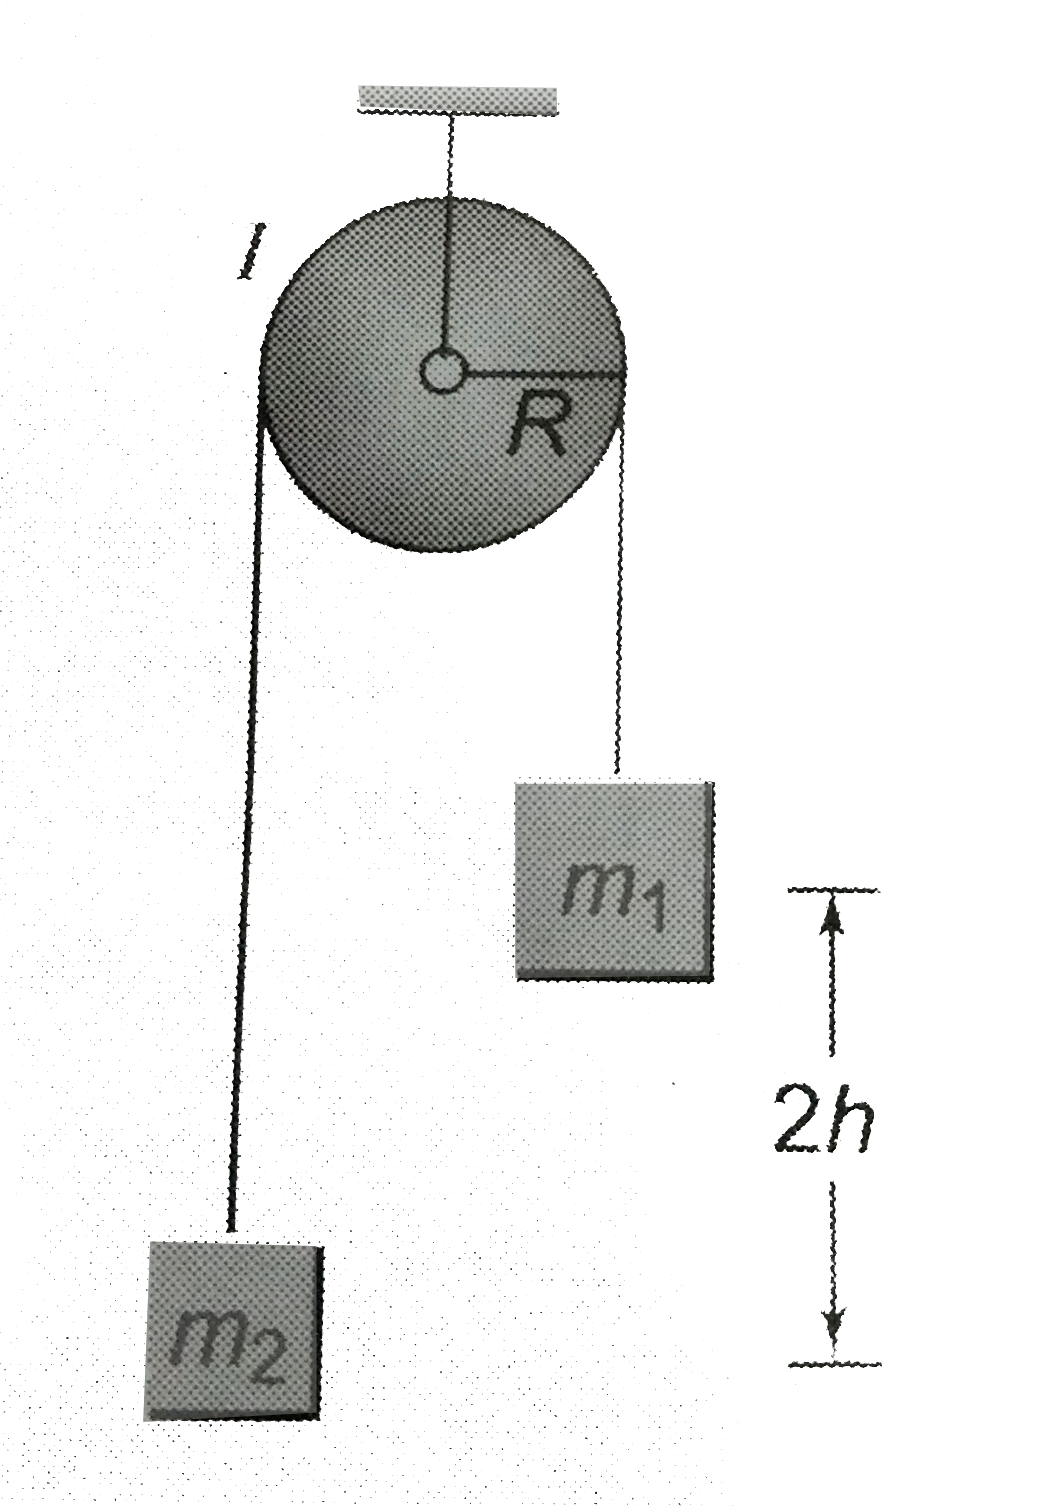 Consider the situation as shown in the figure. If m(1)gtm(2), I is the moment of intertia about its axis of rotation, R is the radius of pulley. The objects are released from rest separated by a vertical distance 2 h. Find the translational speed of the objects as they pass each other. Assume no slipping.